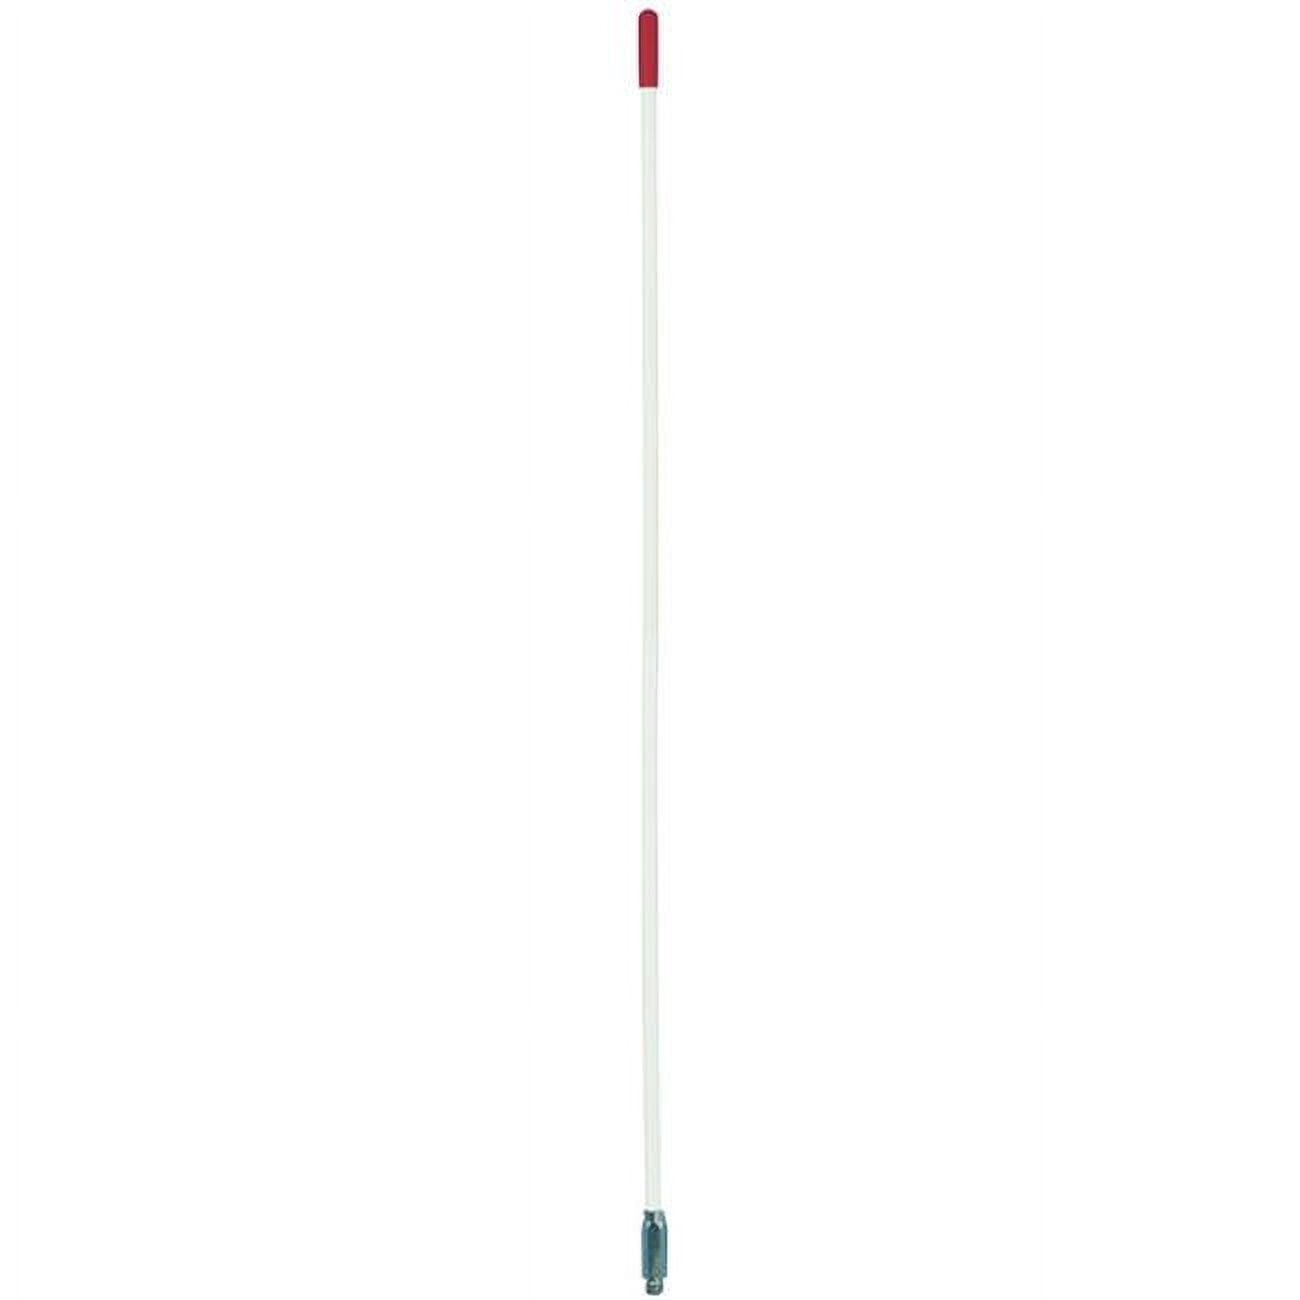 Picture of Accessories Unlimited AU24-W 4 ft. Fiberglass CB Antenna with 0.38 x 24 in. Threads - White